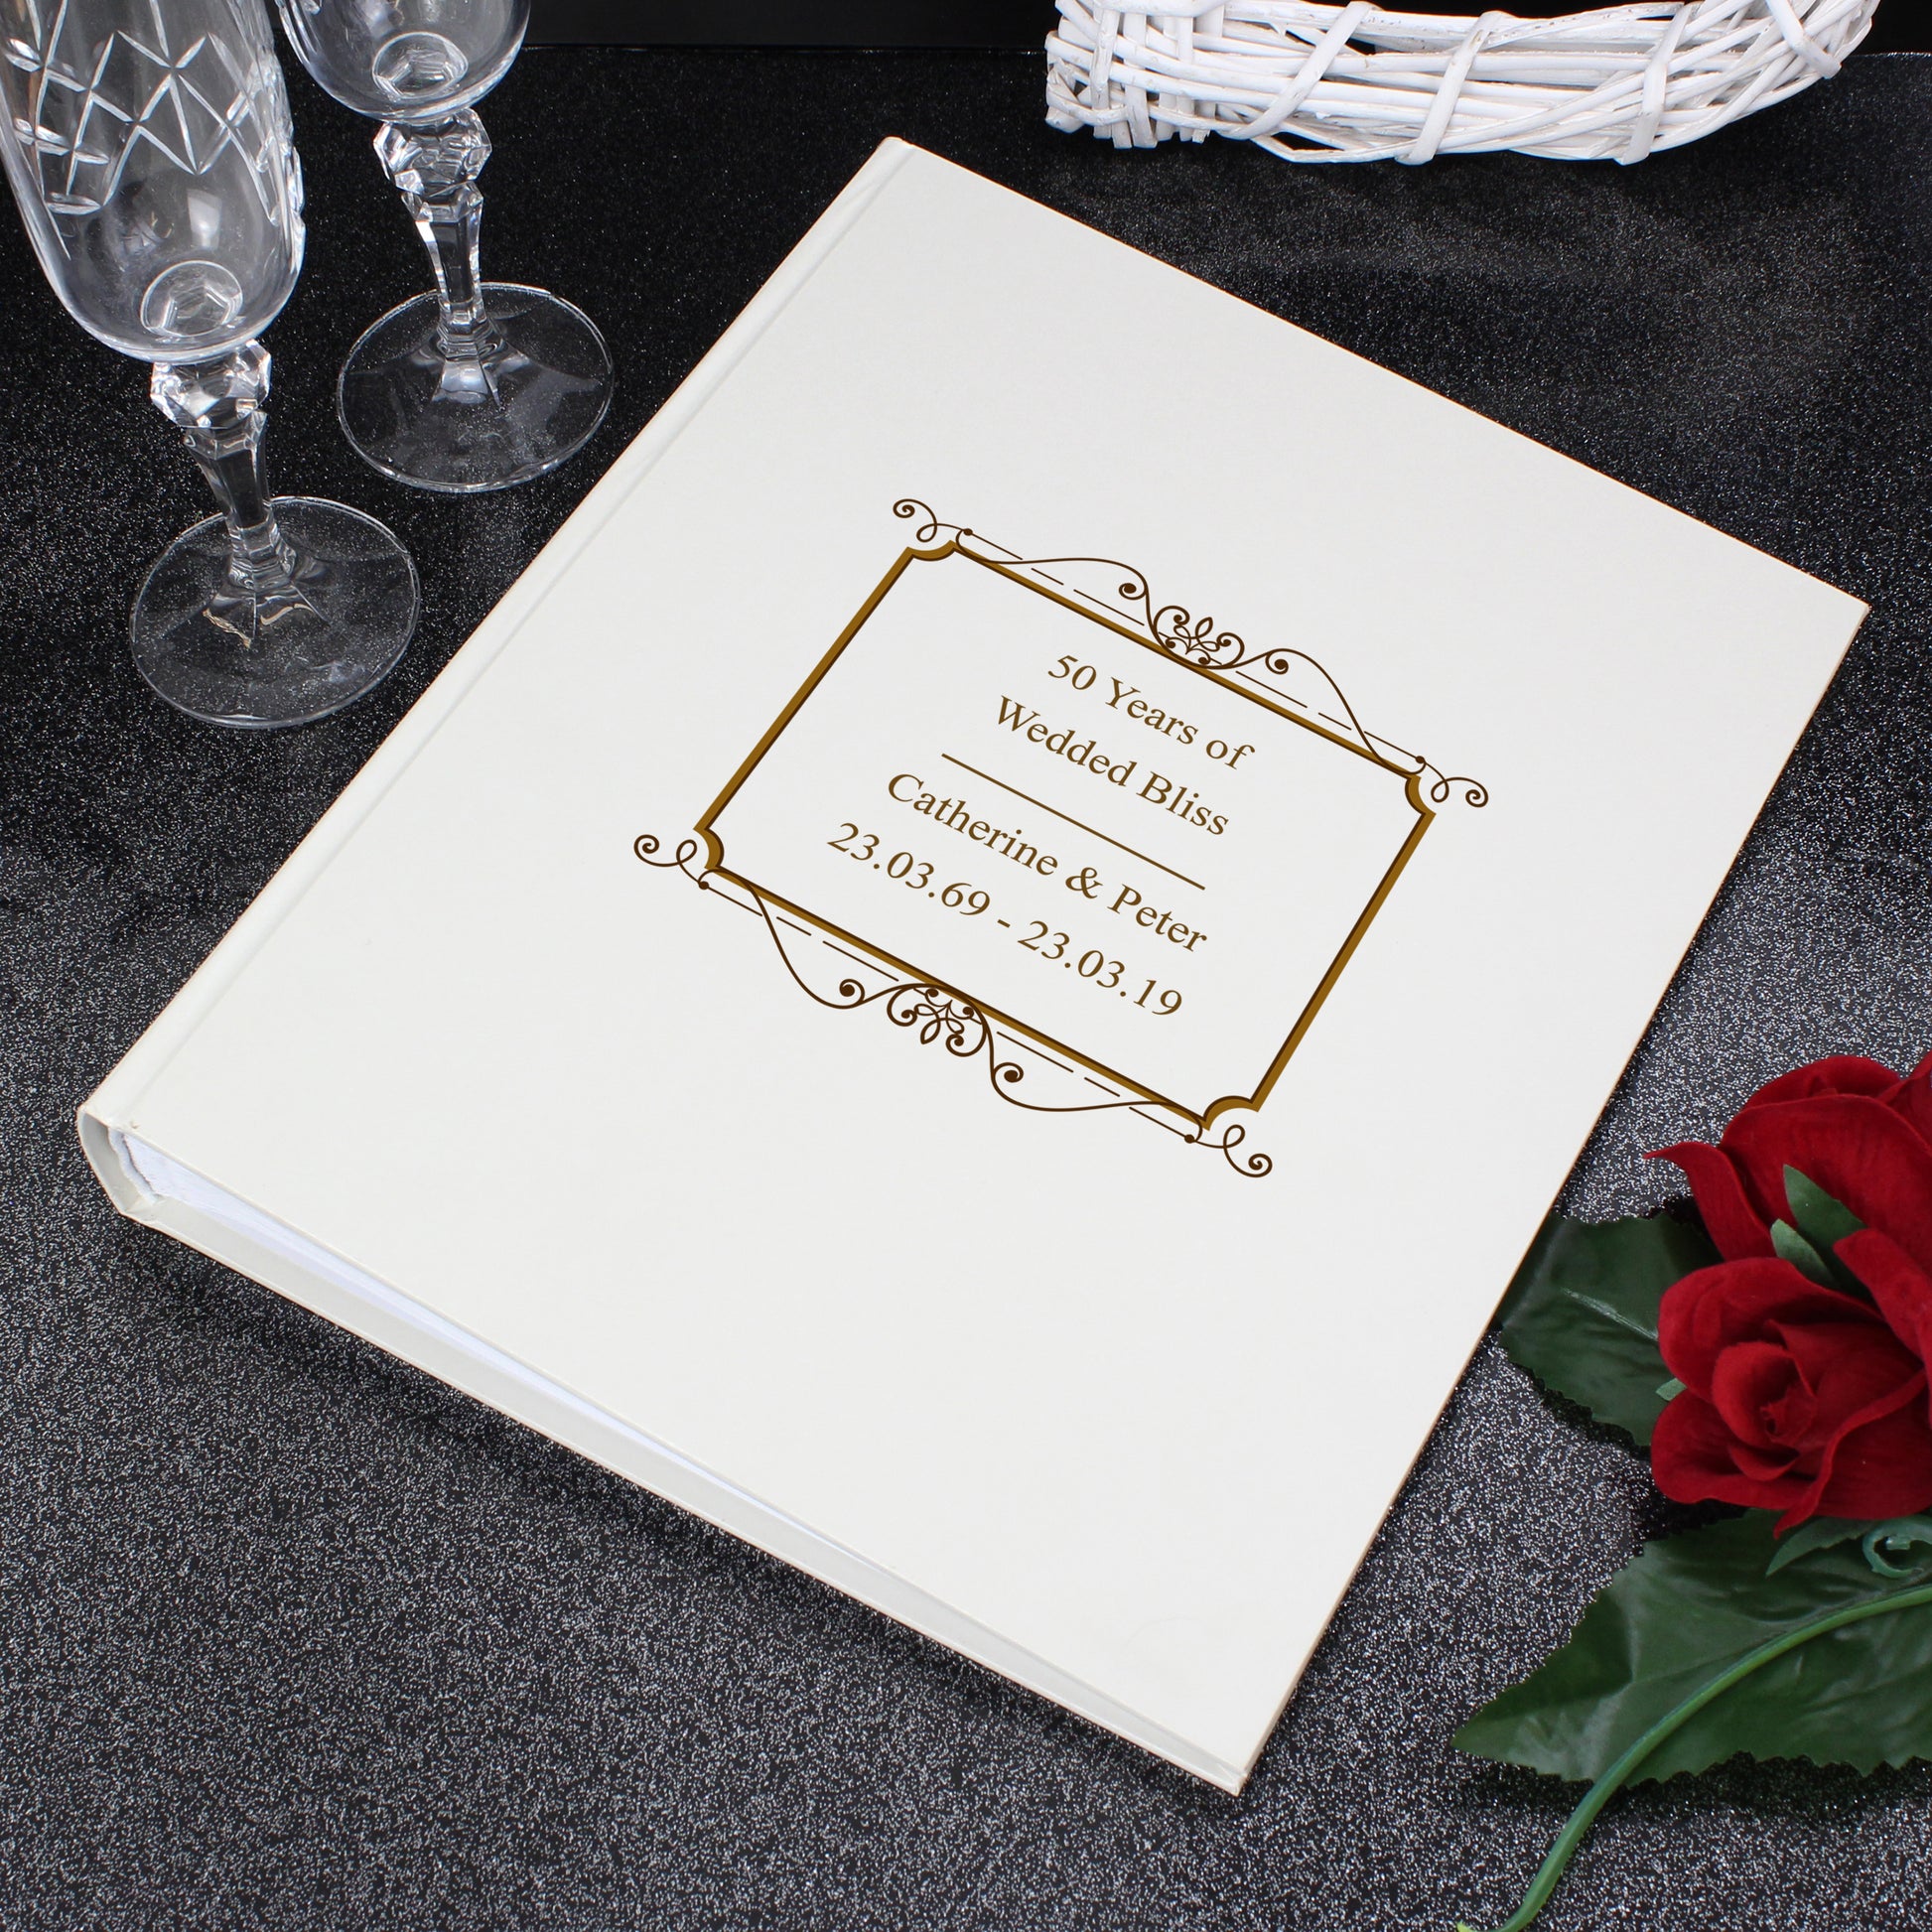 Traditional Personalised Photo Album - Gold/Silver - Violet Belle Gifts - Personalised Photo Album